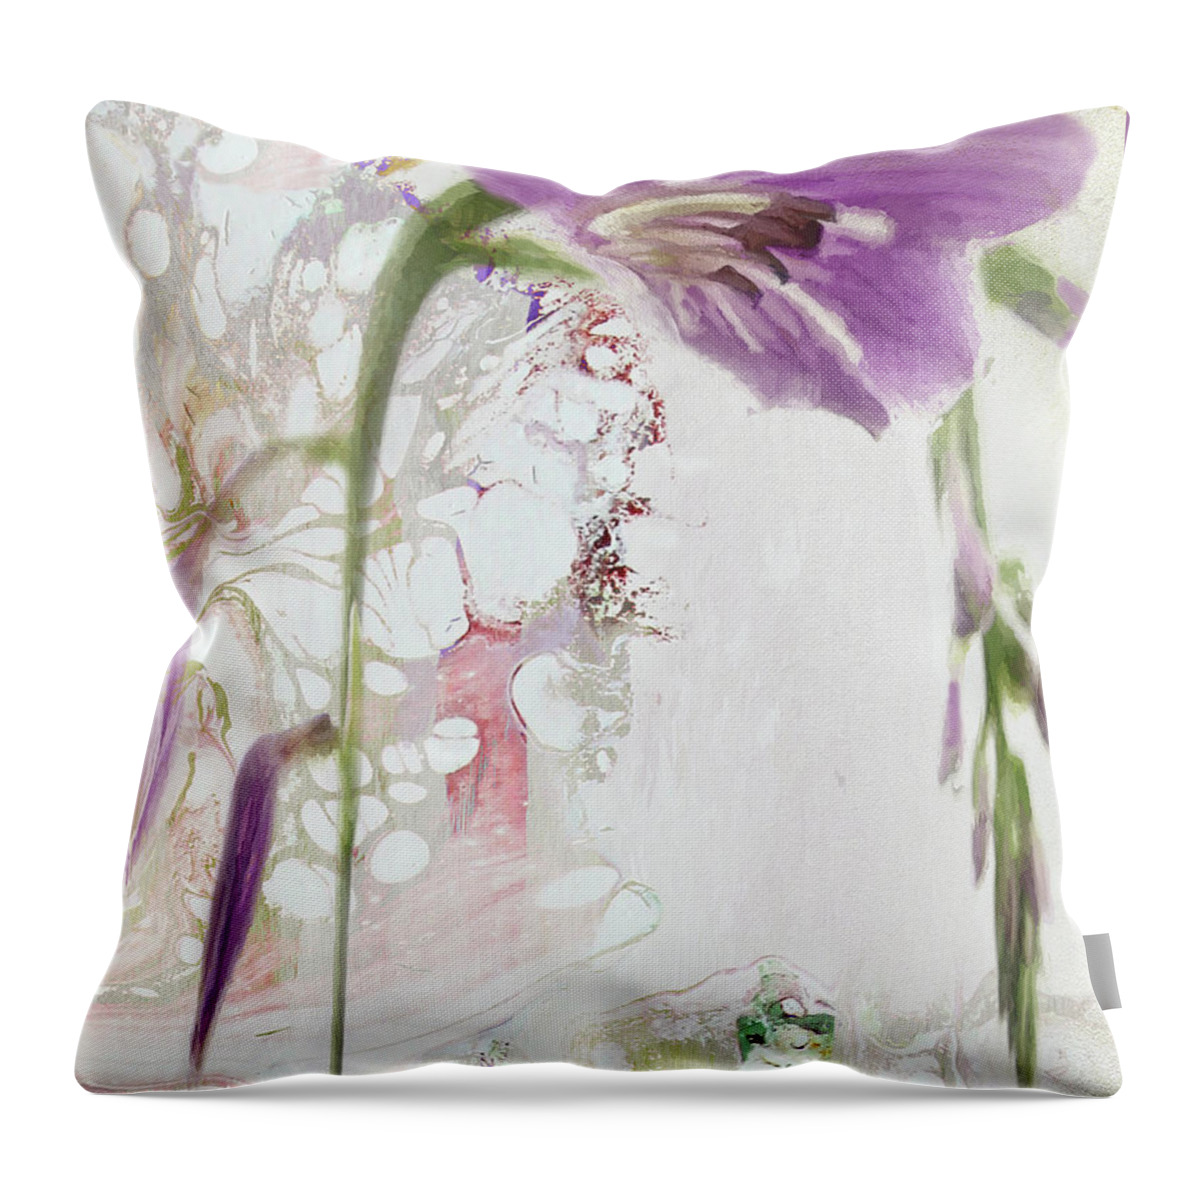 Floral Throw Pillow featuring the photograph Bring Me Flowers by Karen Lynch